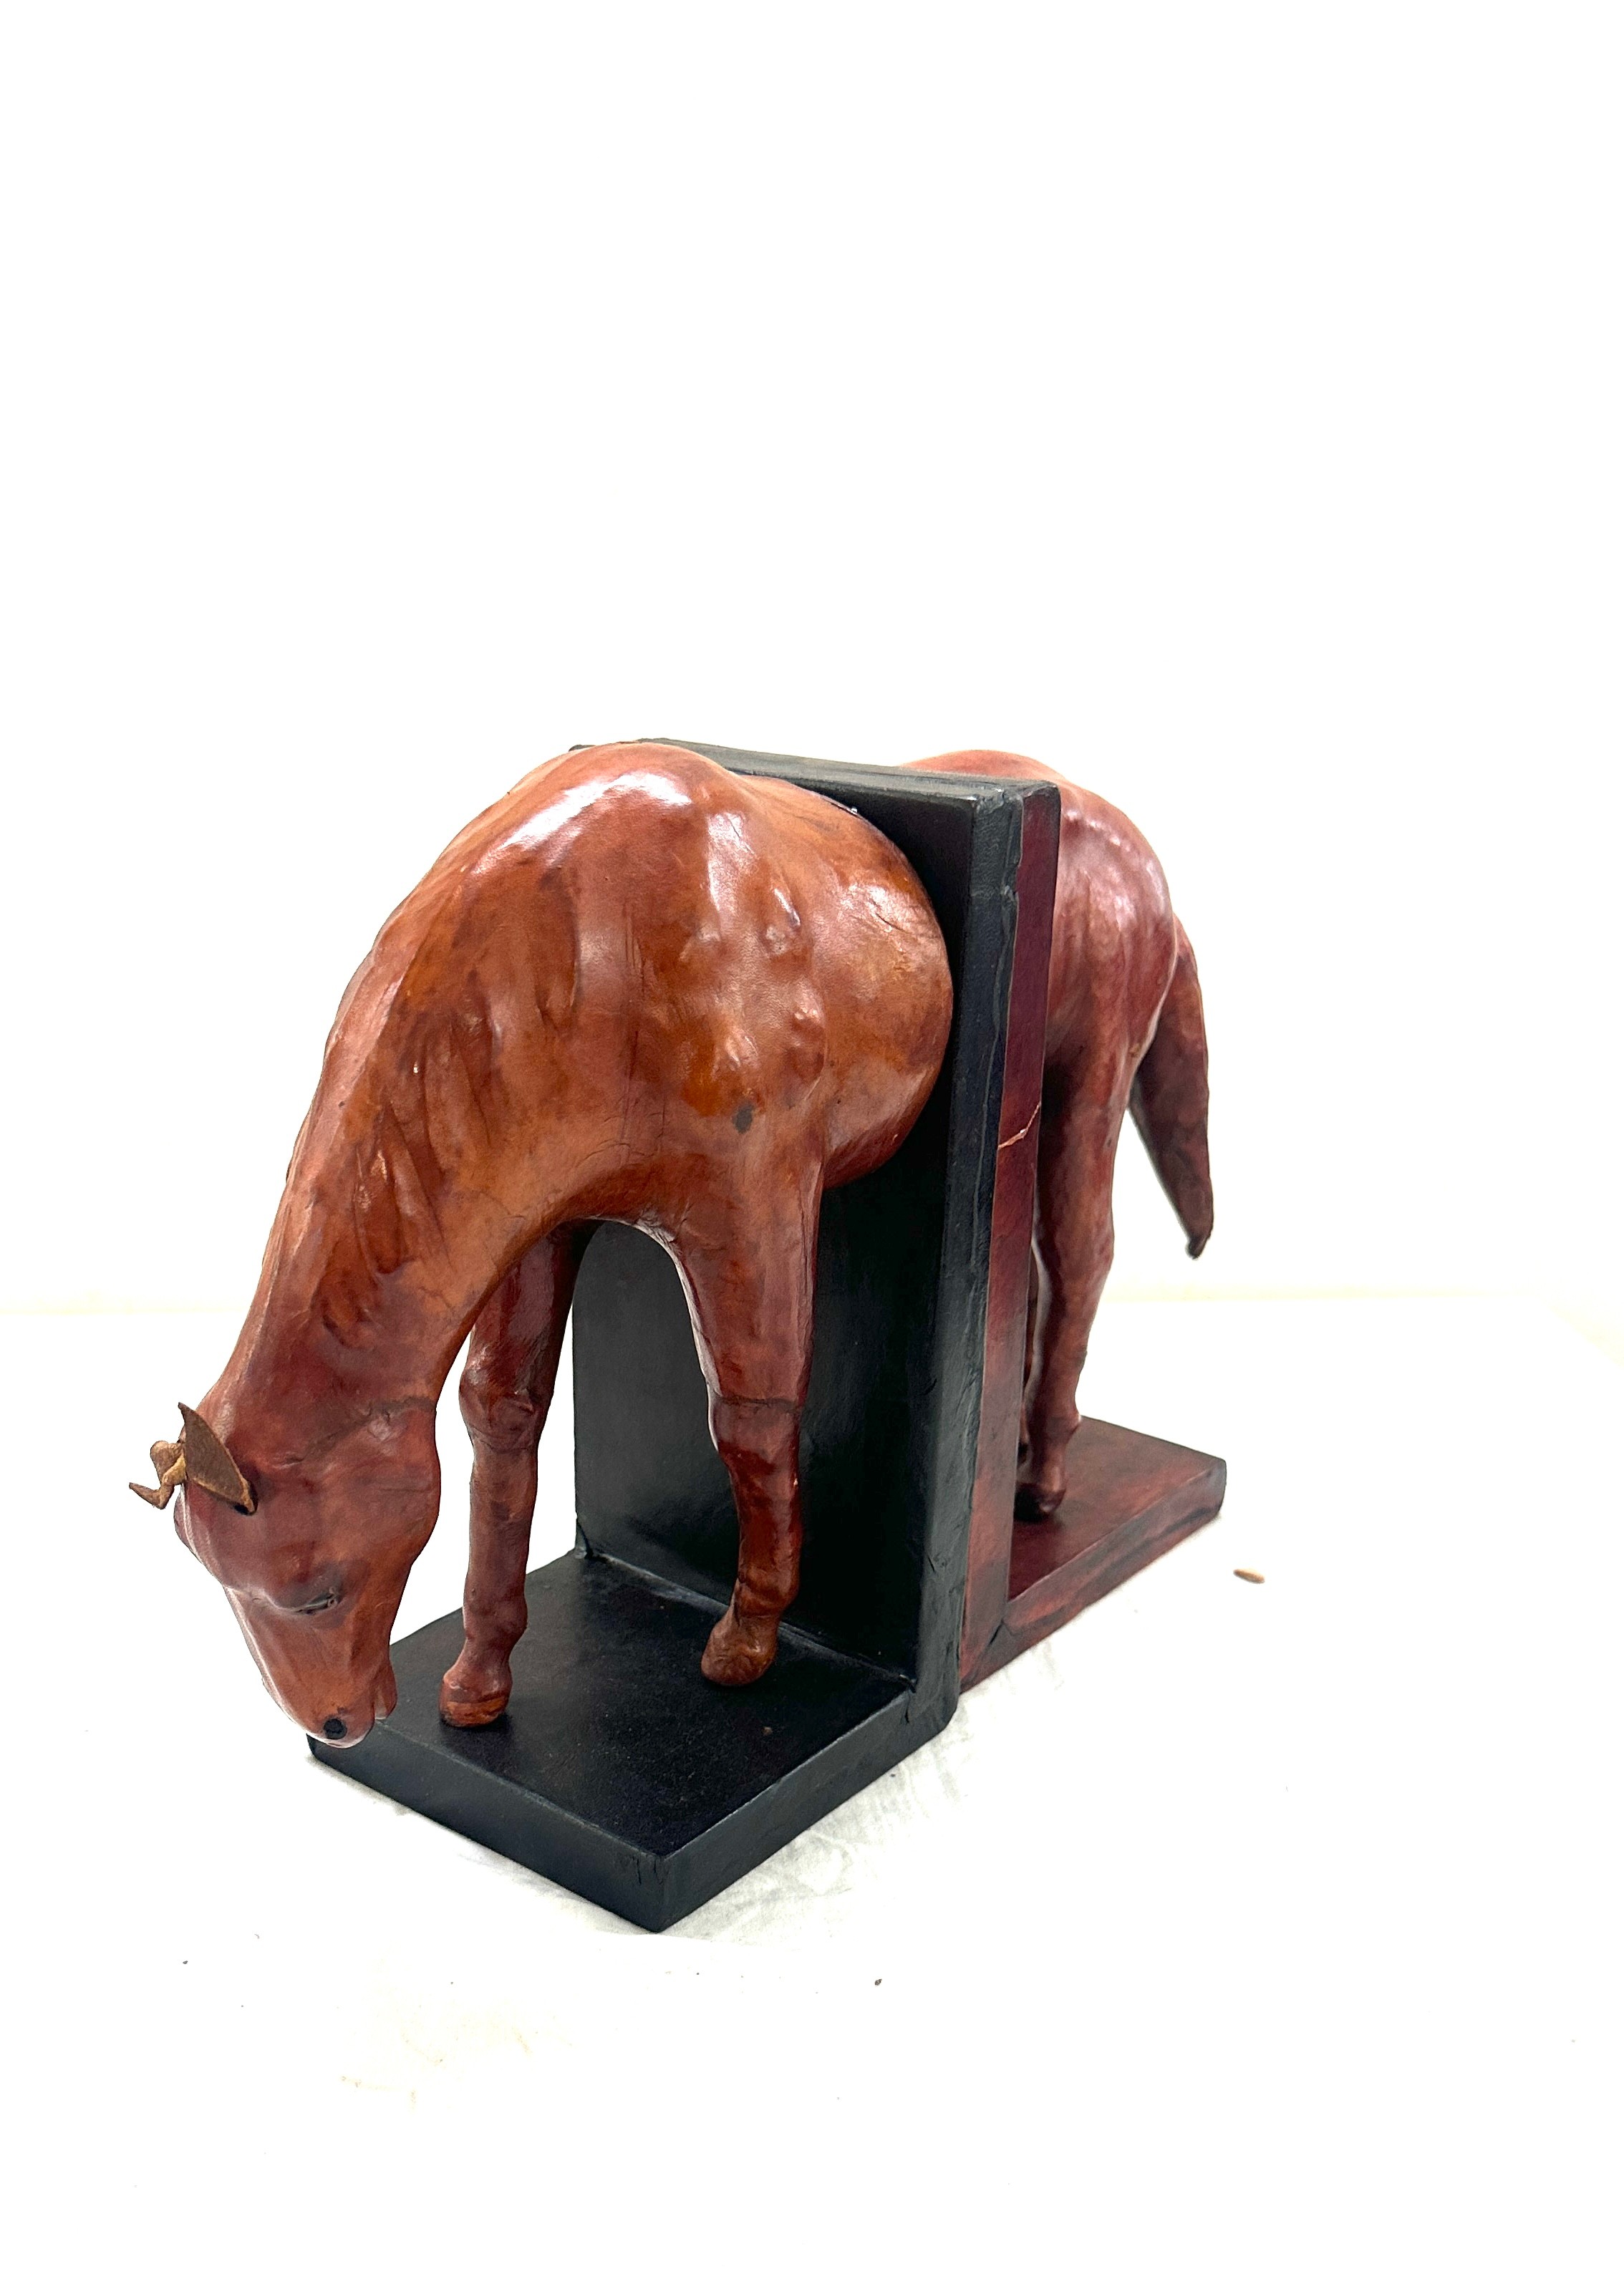 Large leather horse bookends 10 inches by 5 inches colour difference visible - Image 2 of 3